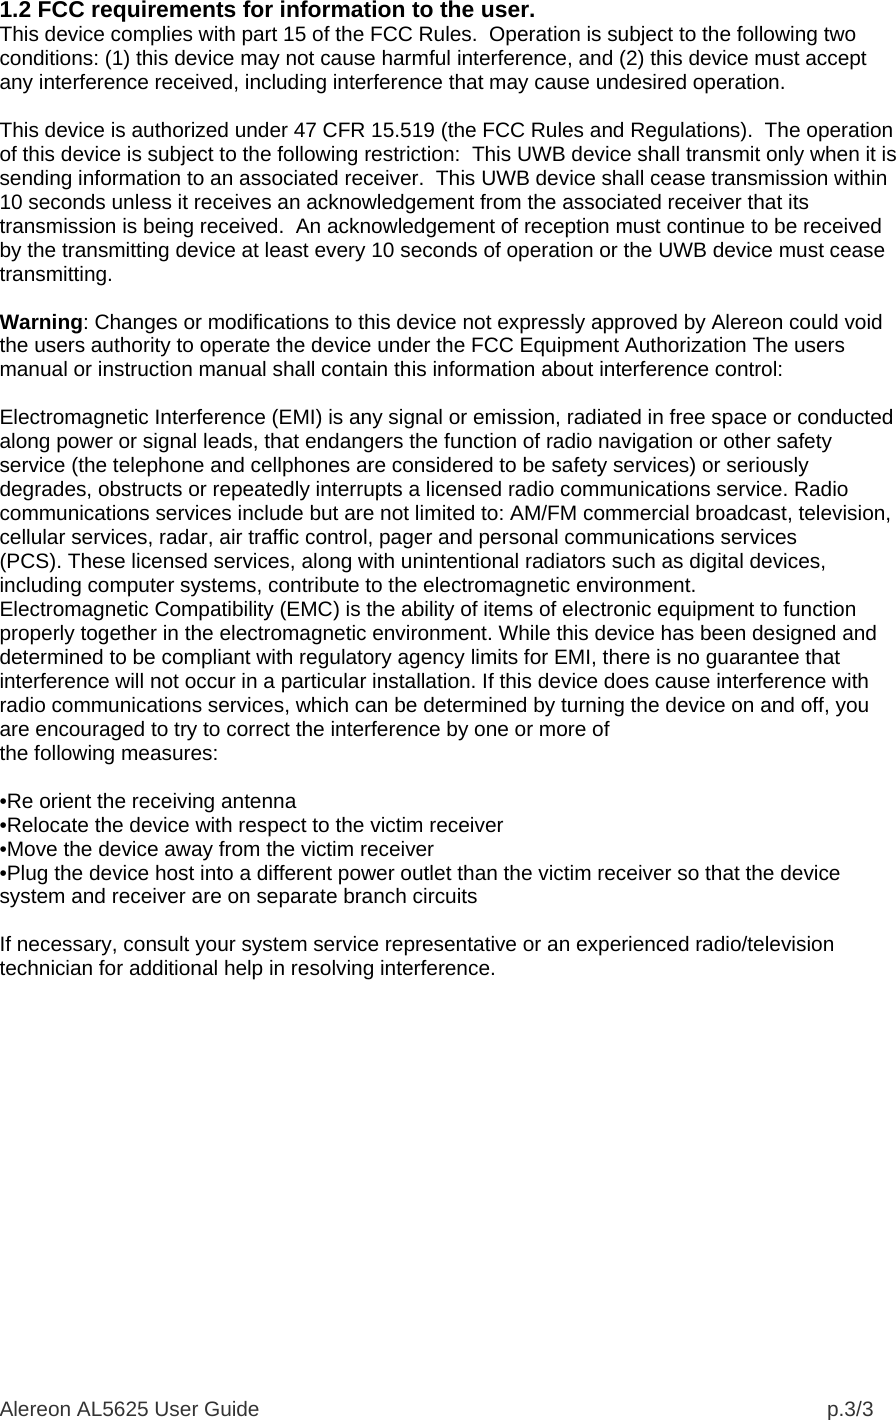 Alereon AL5625 User Guide                                                                                                  p.3/3 1.2 FCC requirements for information to the user. This device complies with part 15 of the FCC Rules.  Operation is subject to the following two conditions: (1) this device may not cause harmful interference, and (2) this device must accept any interference received, including interference that may cause undesired operation.   This device is authorized under 47 CFR 15.519 (the FCC Rules and Regulations).  The operation of this device is subject to the following restriction:  This UWB device shall transmit only when it is sending information to an associated receiver.  This UWB device shall cease transmission within 10 seconds unless it receives an acknowledgement from the associated receiver that its transmission is being received.  An acknowledgement of reception must continue to be received by the transmitting device at least every 10 seconds of operation or the UWB device must cease transmitting.  Warning: Changes or modifications to this device not expressly approved by Alereon could void the users authority to operate the device under the FCC Equipment Authorization The users manual or instruction manual shall contain this information about interference control:  Electromagnetic Interference (EMI) is any signal or emission, radiated in free space or conducted along power or signal leads, that endangers the function of radio navigation or other safety service (the telephone and cellphones are considered to be safety services) or seriously degrades, obstructs or repeatedly interrupts a licensed radio communications service. Radio communications services include but are not limited to: AM/FM commercial broadcast, television, cellular services, radar, air traffic control, pager and personal communications services (PCS). These licensed services, along with unintentional radiators such as digital devices, including computer systems, contribute to the electromagnetic environment. Electromagnetic Compatibility (EMC) is the ability of items of electronic equipment to function properly together in the electromagnetic environment. While this device has been designed and determined to be compliant with regulatory agency limits for EMI, there is no guarantee that interference will not occur in a particular installation. If this device does cause interference with radio communications services, which can be determined by turning the device on and off, you are encouraged to try to correct the interference by one or more of the following measures:  •Re orient the receiving antenna •Relocate the device with respect to the victim receiver •Move the device away from the victim receiver •Plug the device host into a different power outlet than the victim receiver so that the device system and receiver are on separate branch circuits  If necessary, consult your system service representative or an experienced radio/television technician for additional help in resolving interference.  